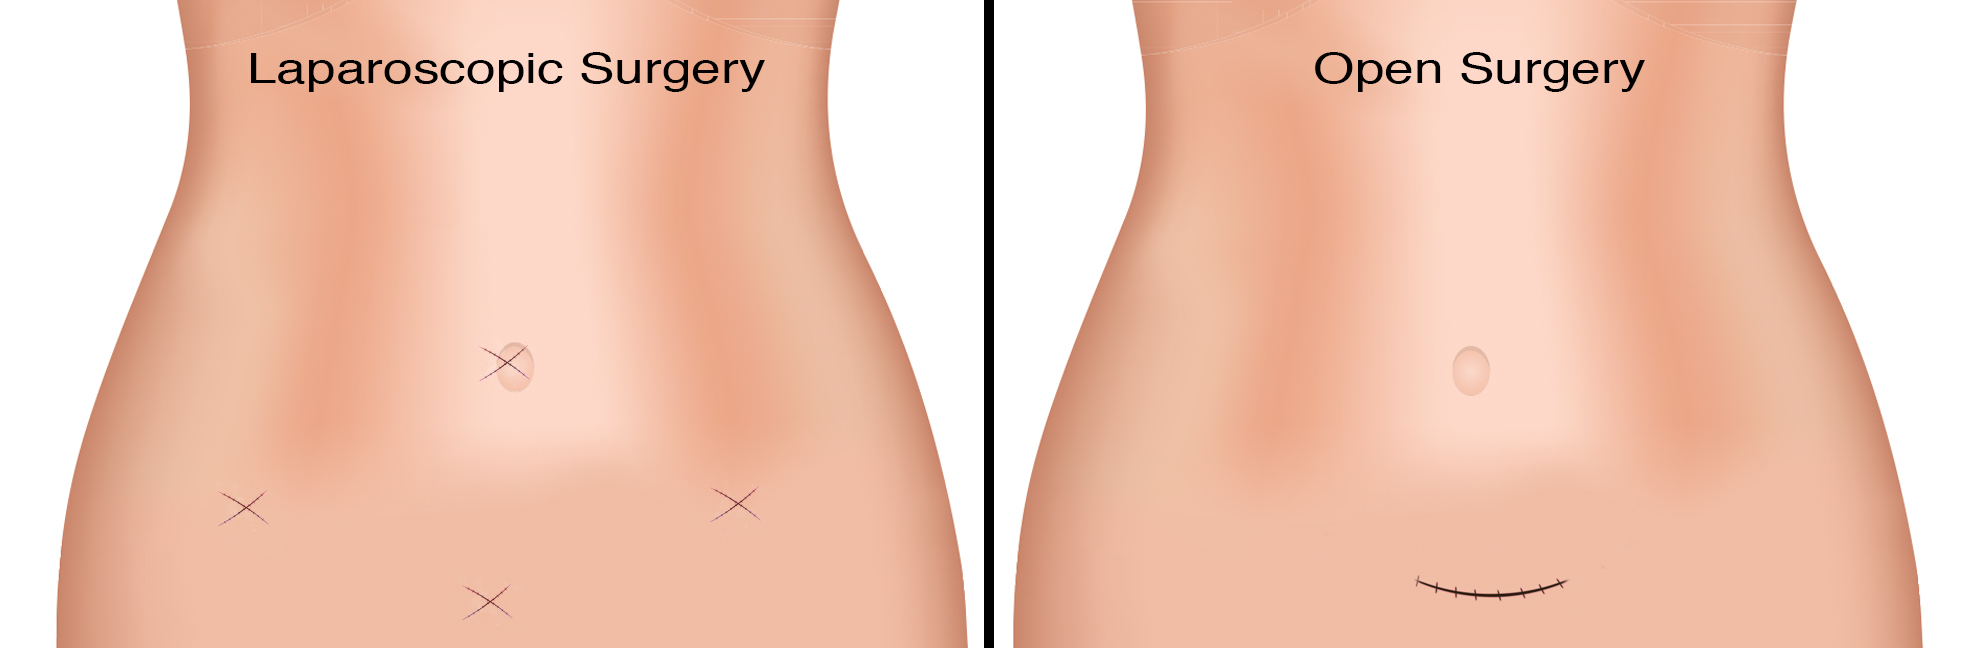 Comparison of laparoscopic and open scar placement for female pelvic surgery | University of Colorado Urogynecology | Denver, CO